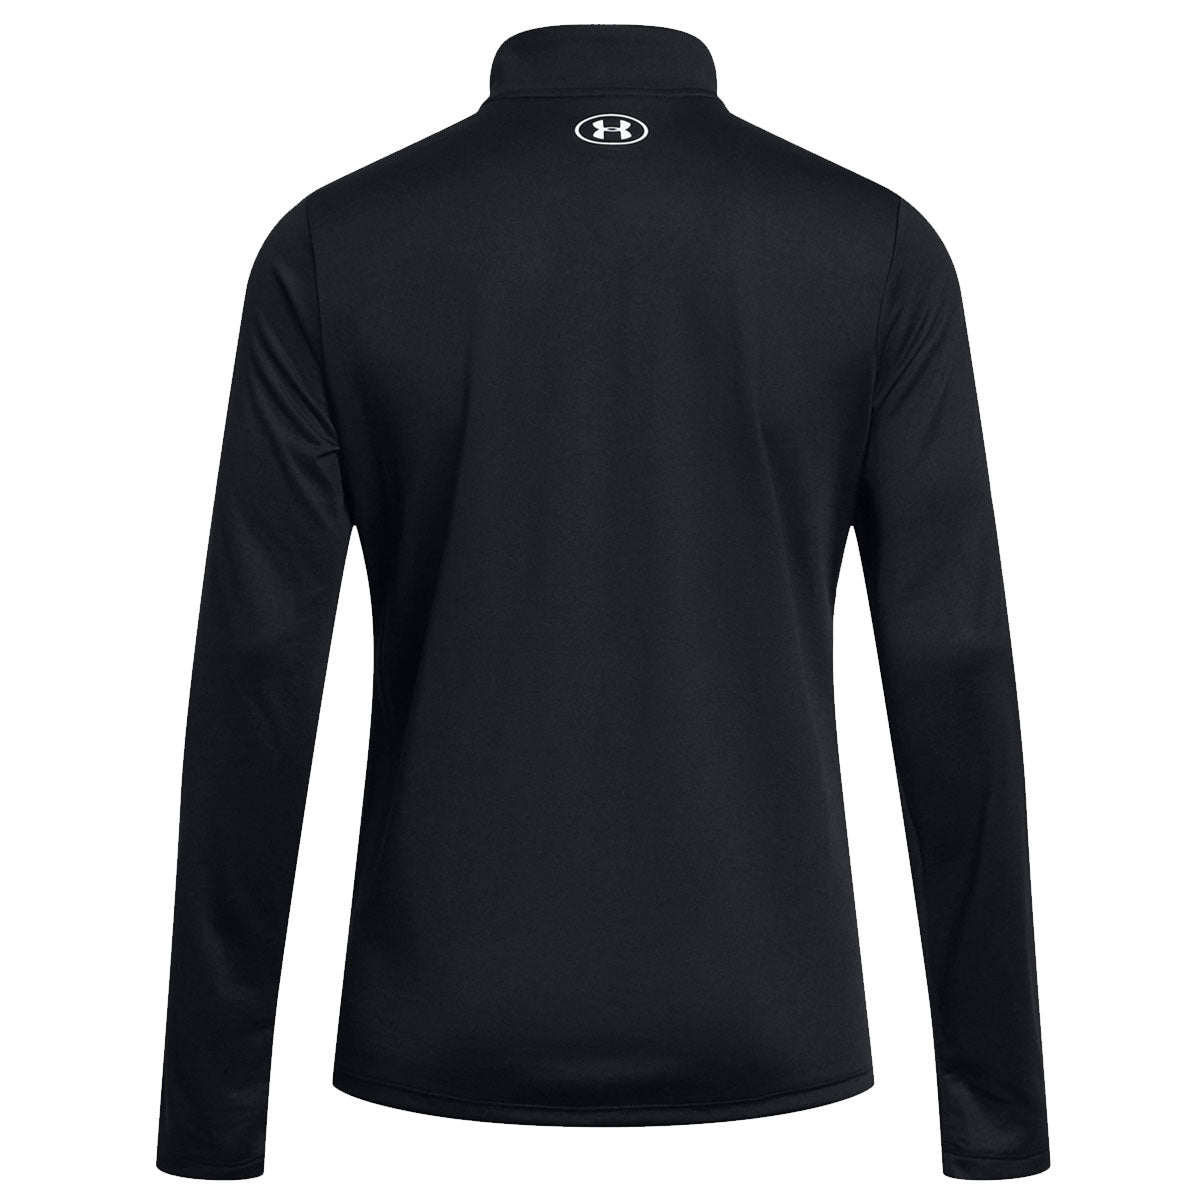 Under Armour Tech 1/2 Zip Solid Top - Womens - Black/White